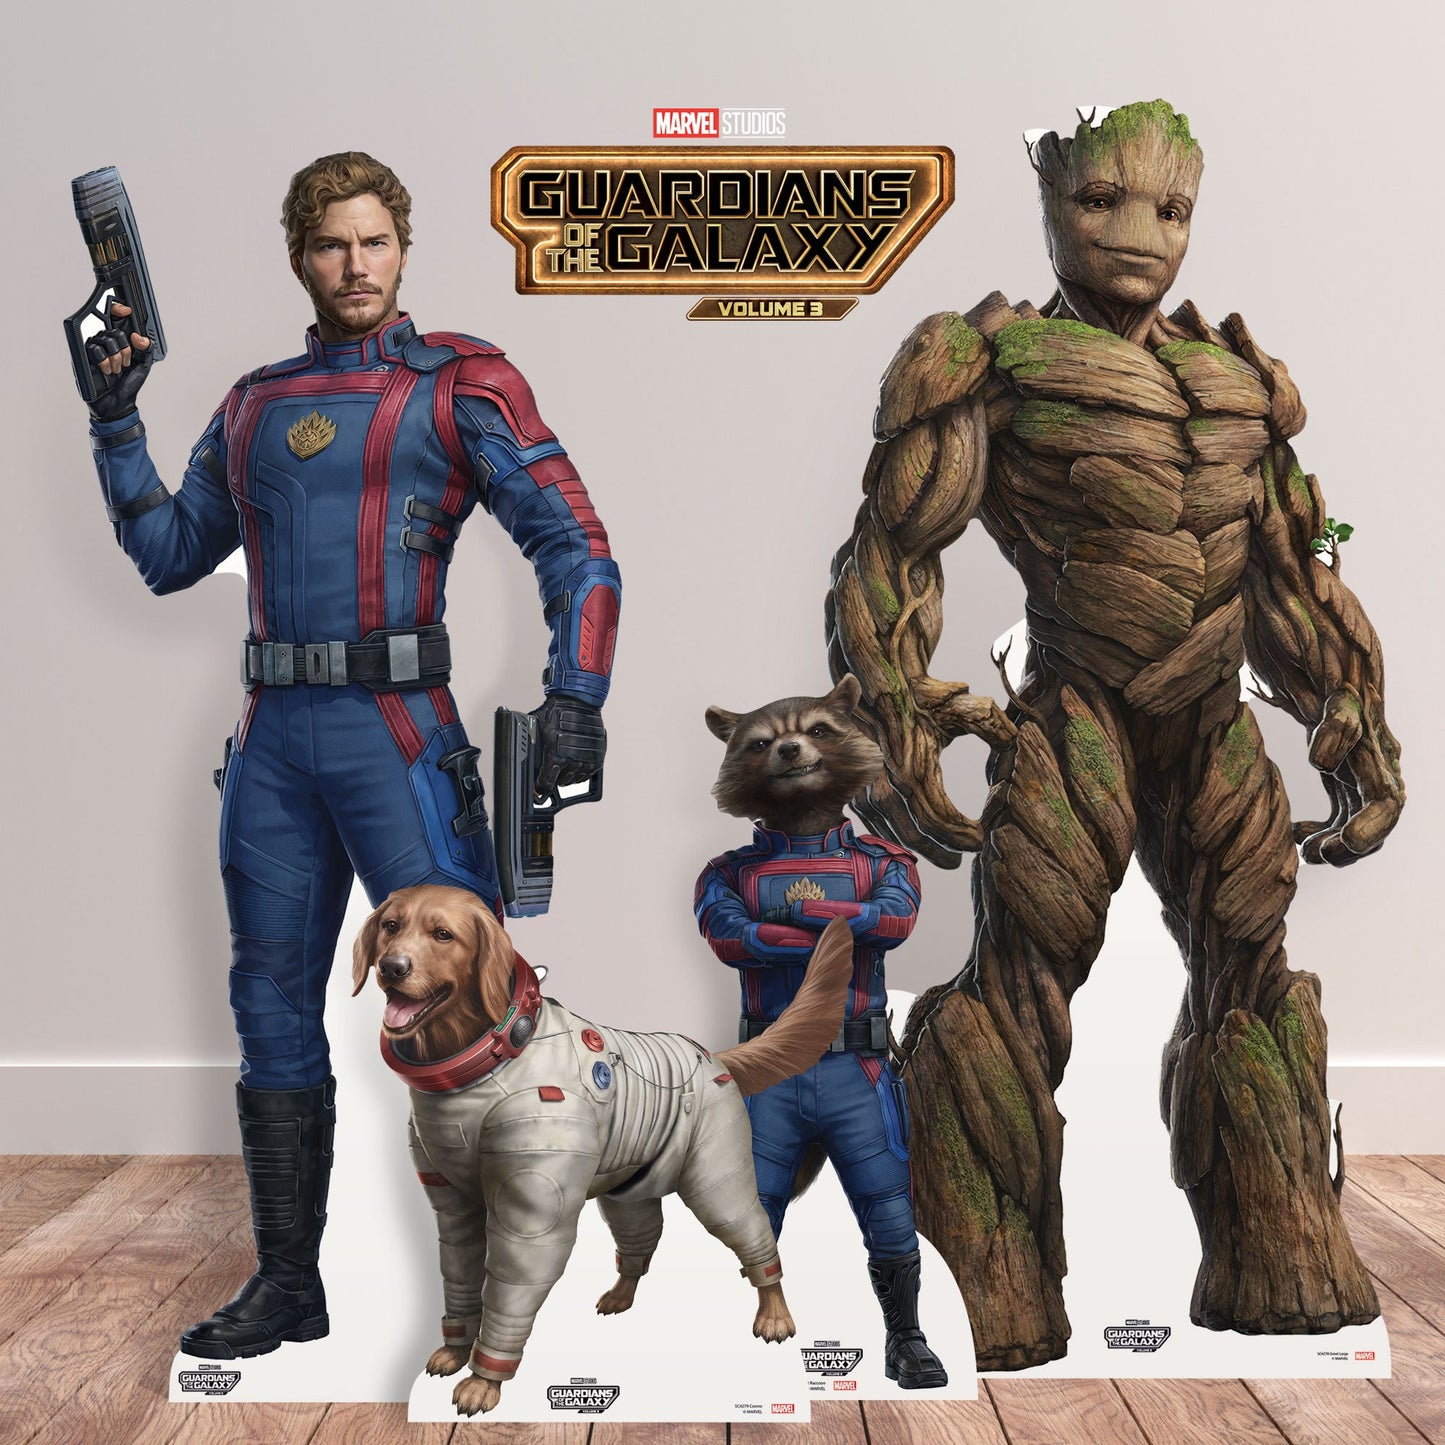 SC4279 Cosmo the Spacedog Guardians of the Galaxy Three Marvel Lifesize Cardboard Cut Out With Mini Cardboard Cutout